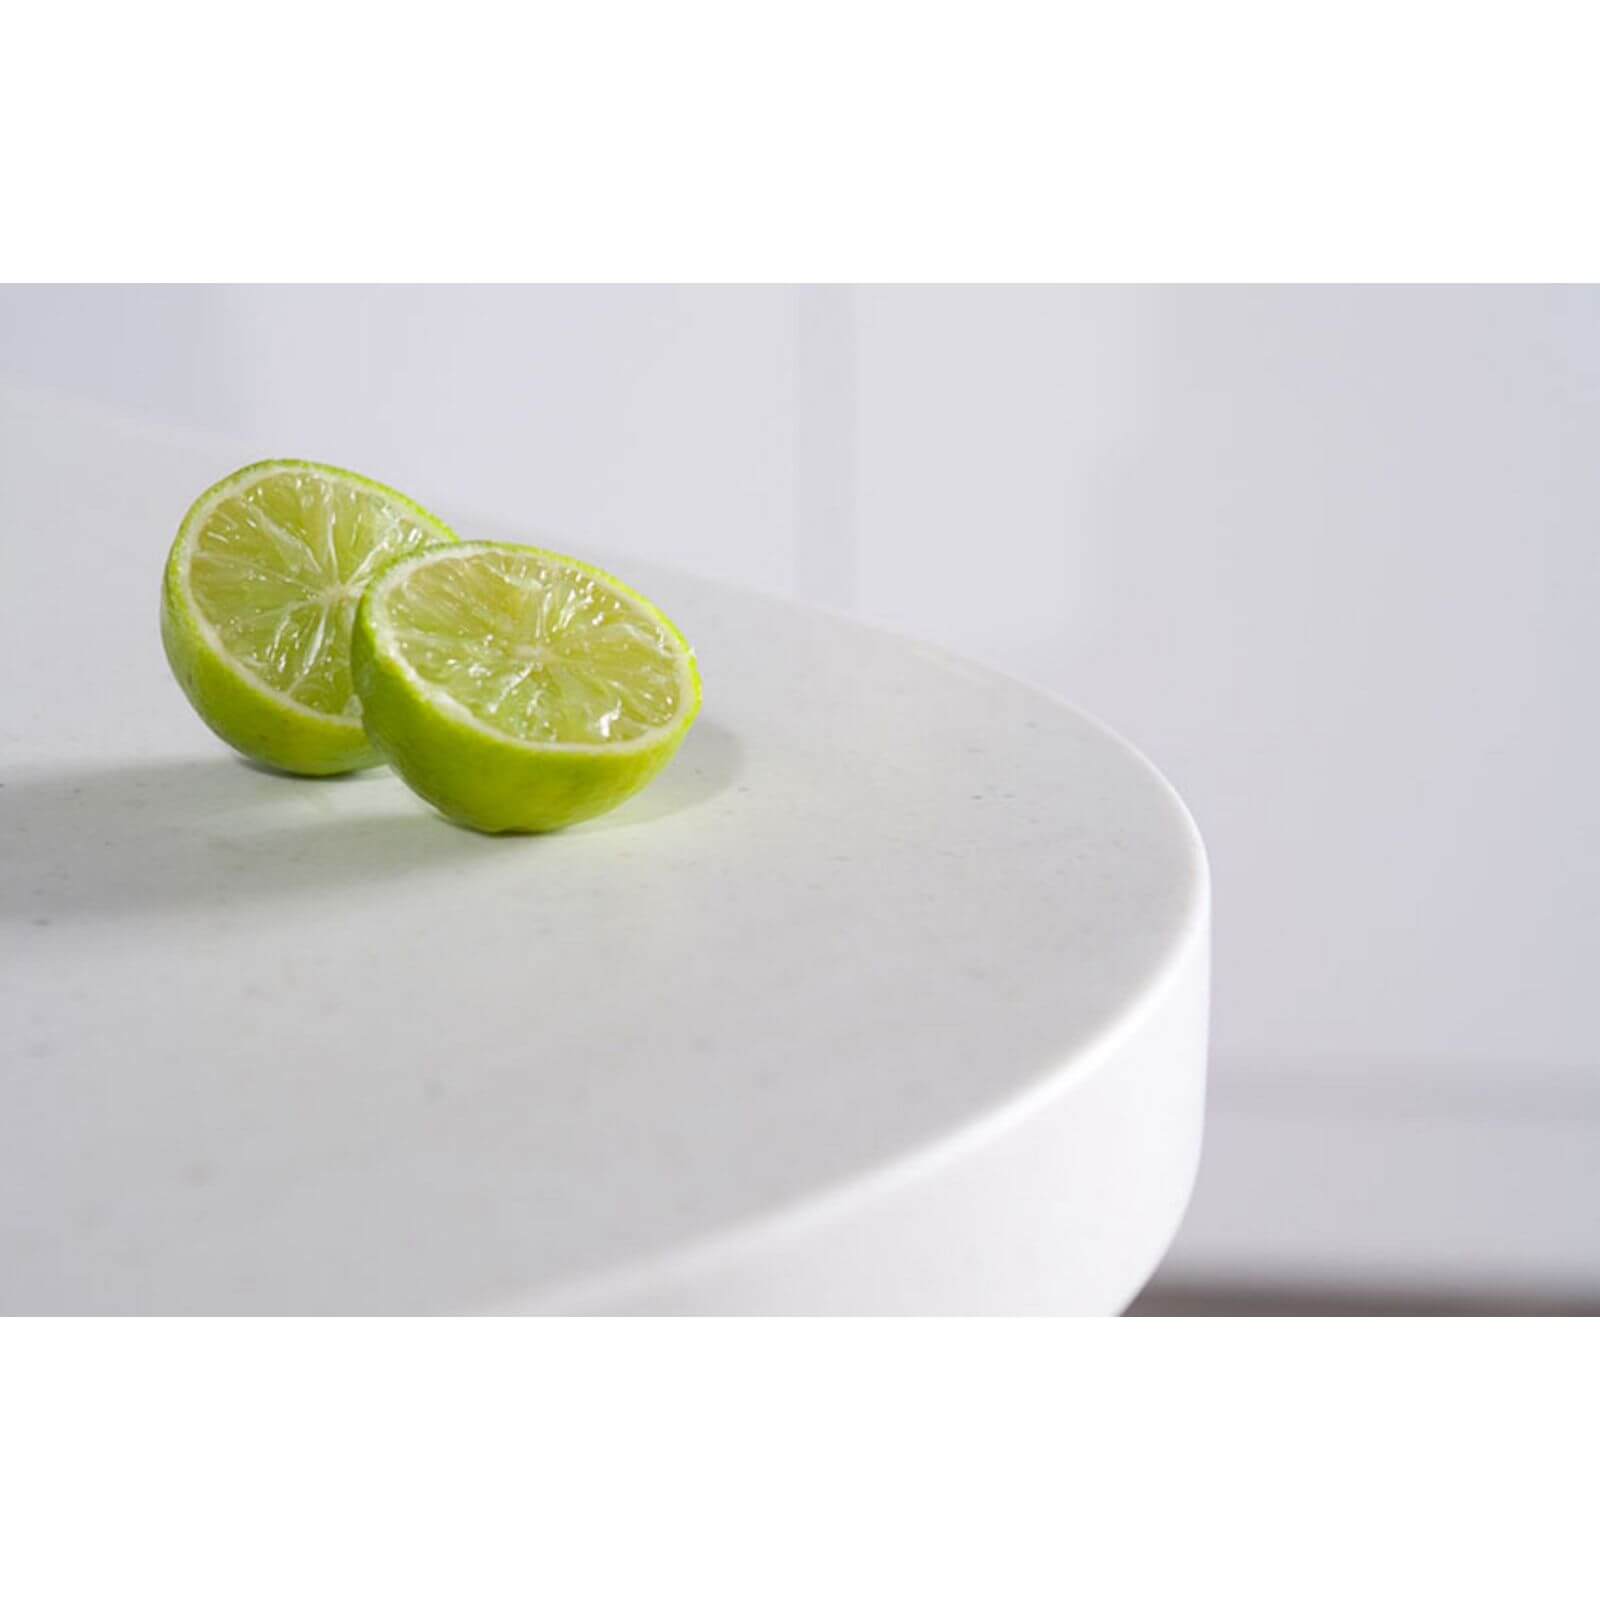 Maia Calcite Kitchen Sink Worktop - Acrylic Super Large Right Hand Bowl - 3600 x 650 x 28mm